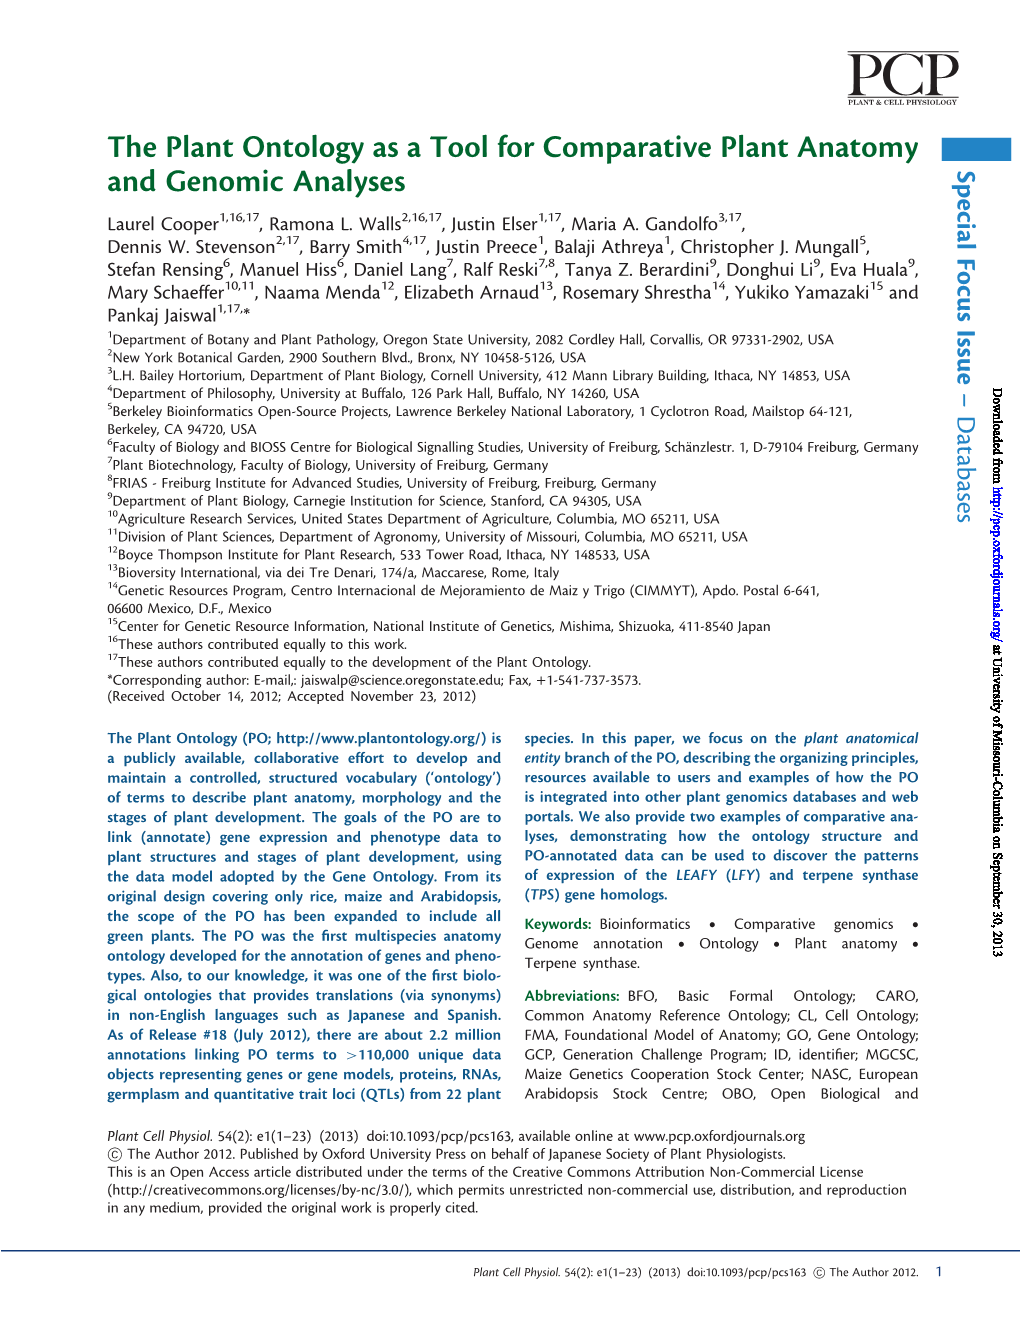 The Plant Ontology As a Tool for Comparative Plant Anatomy and Genomic Analyses Issue Focus Special Laurel Cooper1,16,17, Ramona L